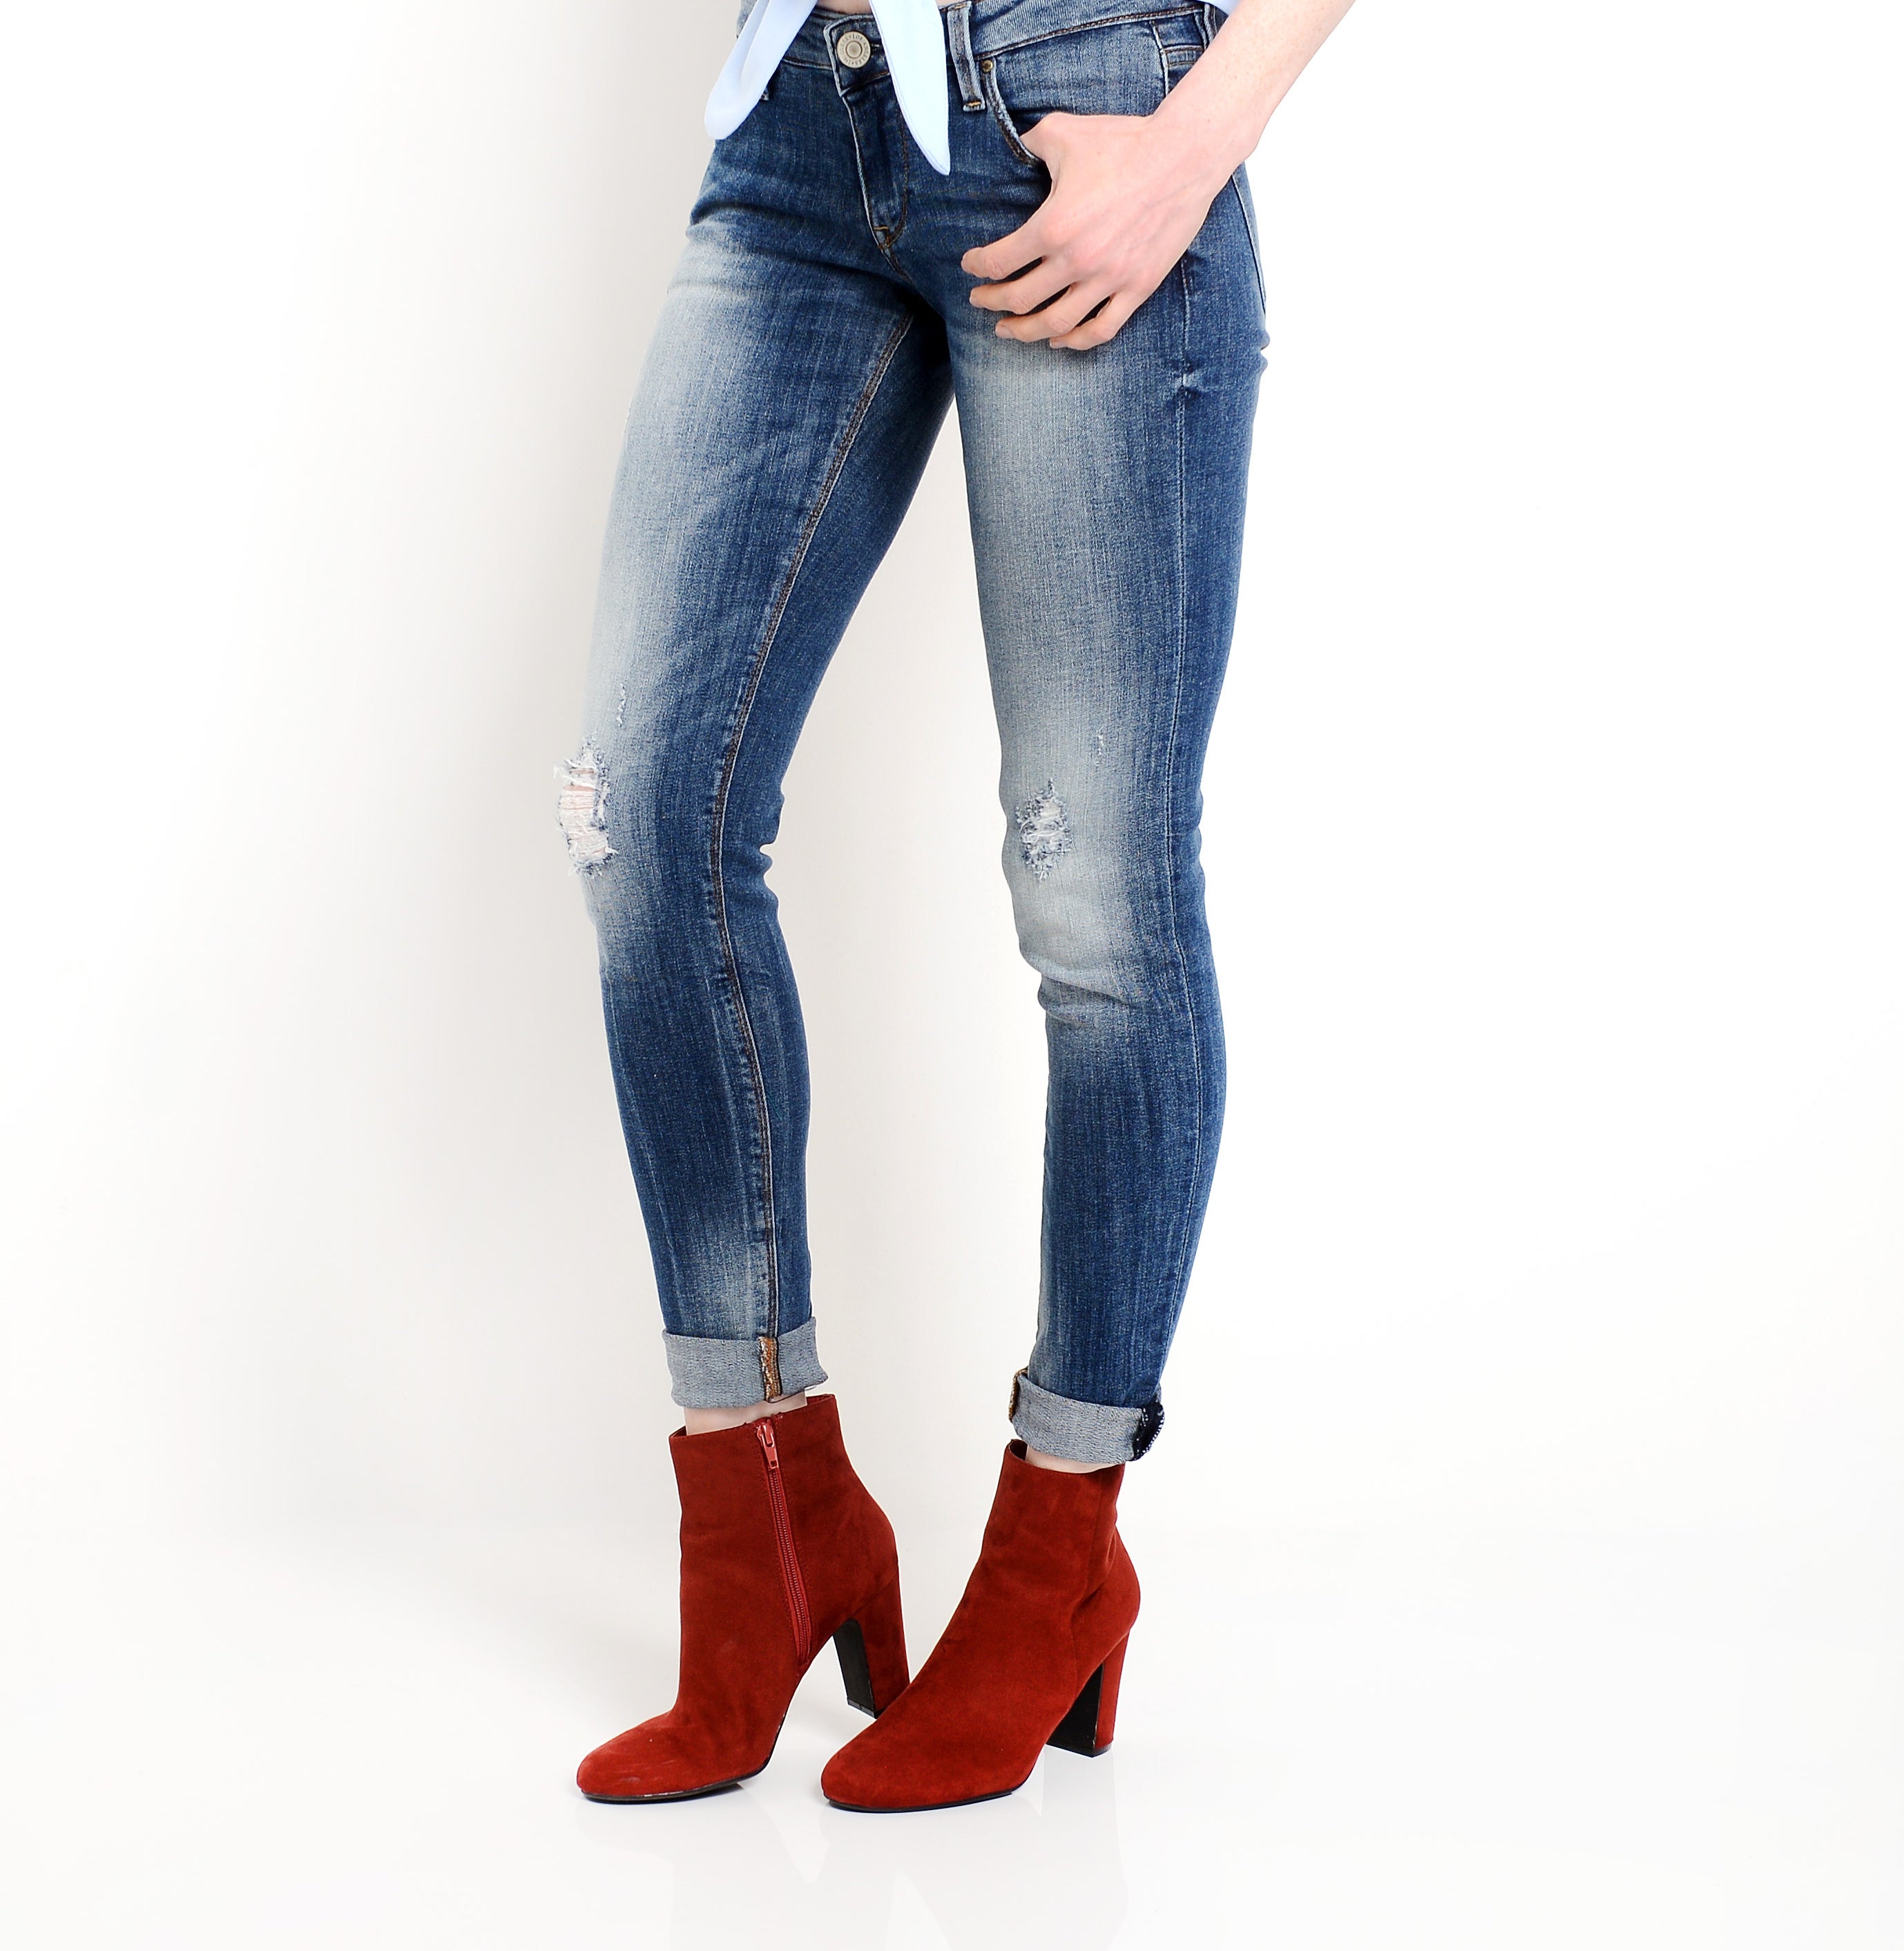 A pair of skinny jeans and booties